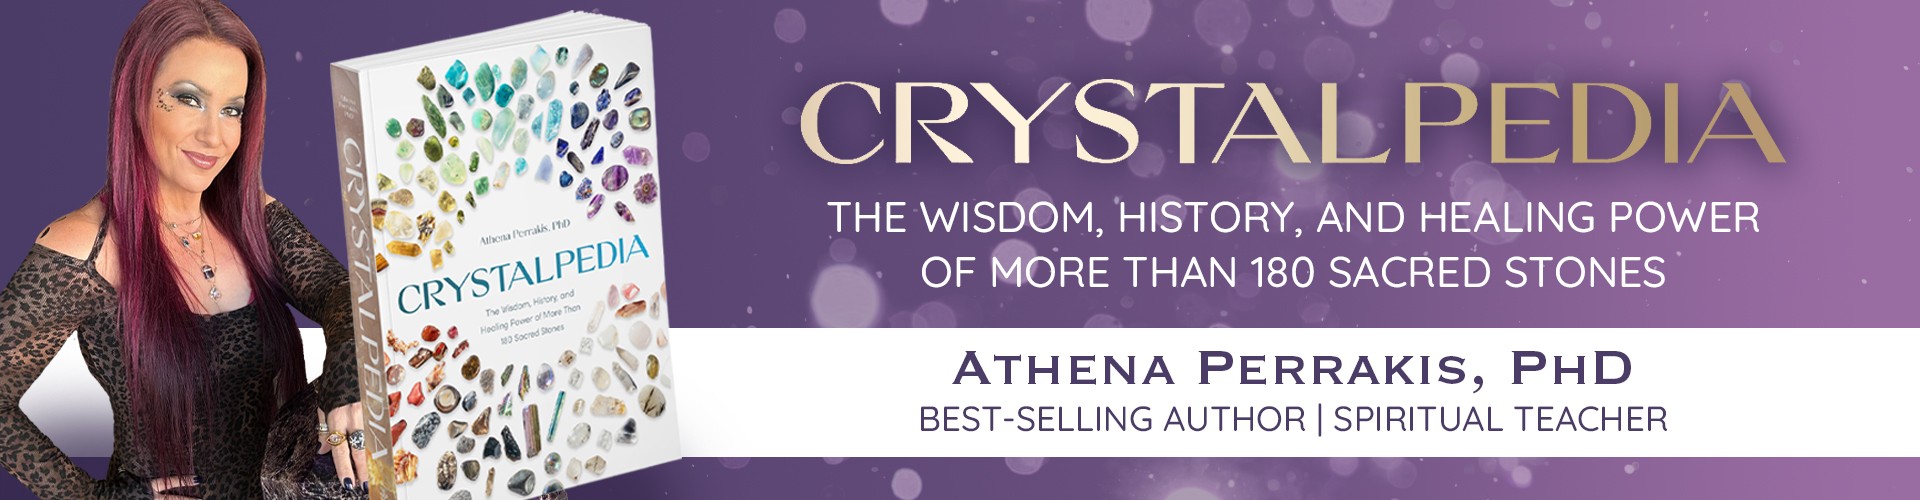 Get your copy of Crystalpedia - The Wisdom, history and healing power of more than 180 sacred stones